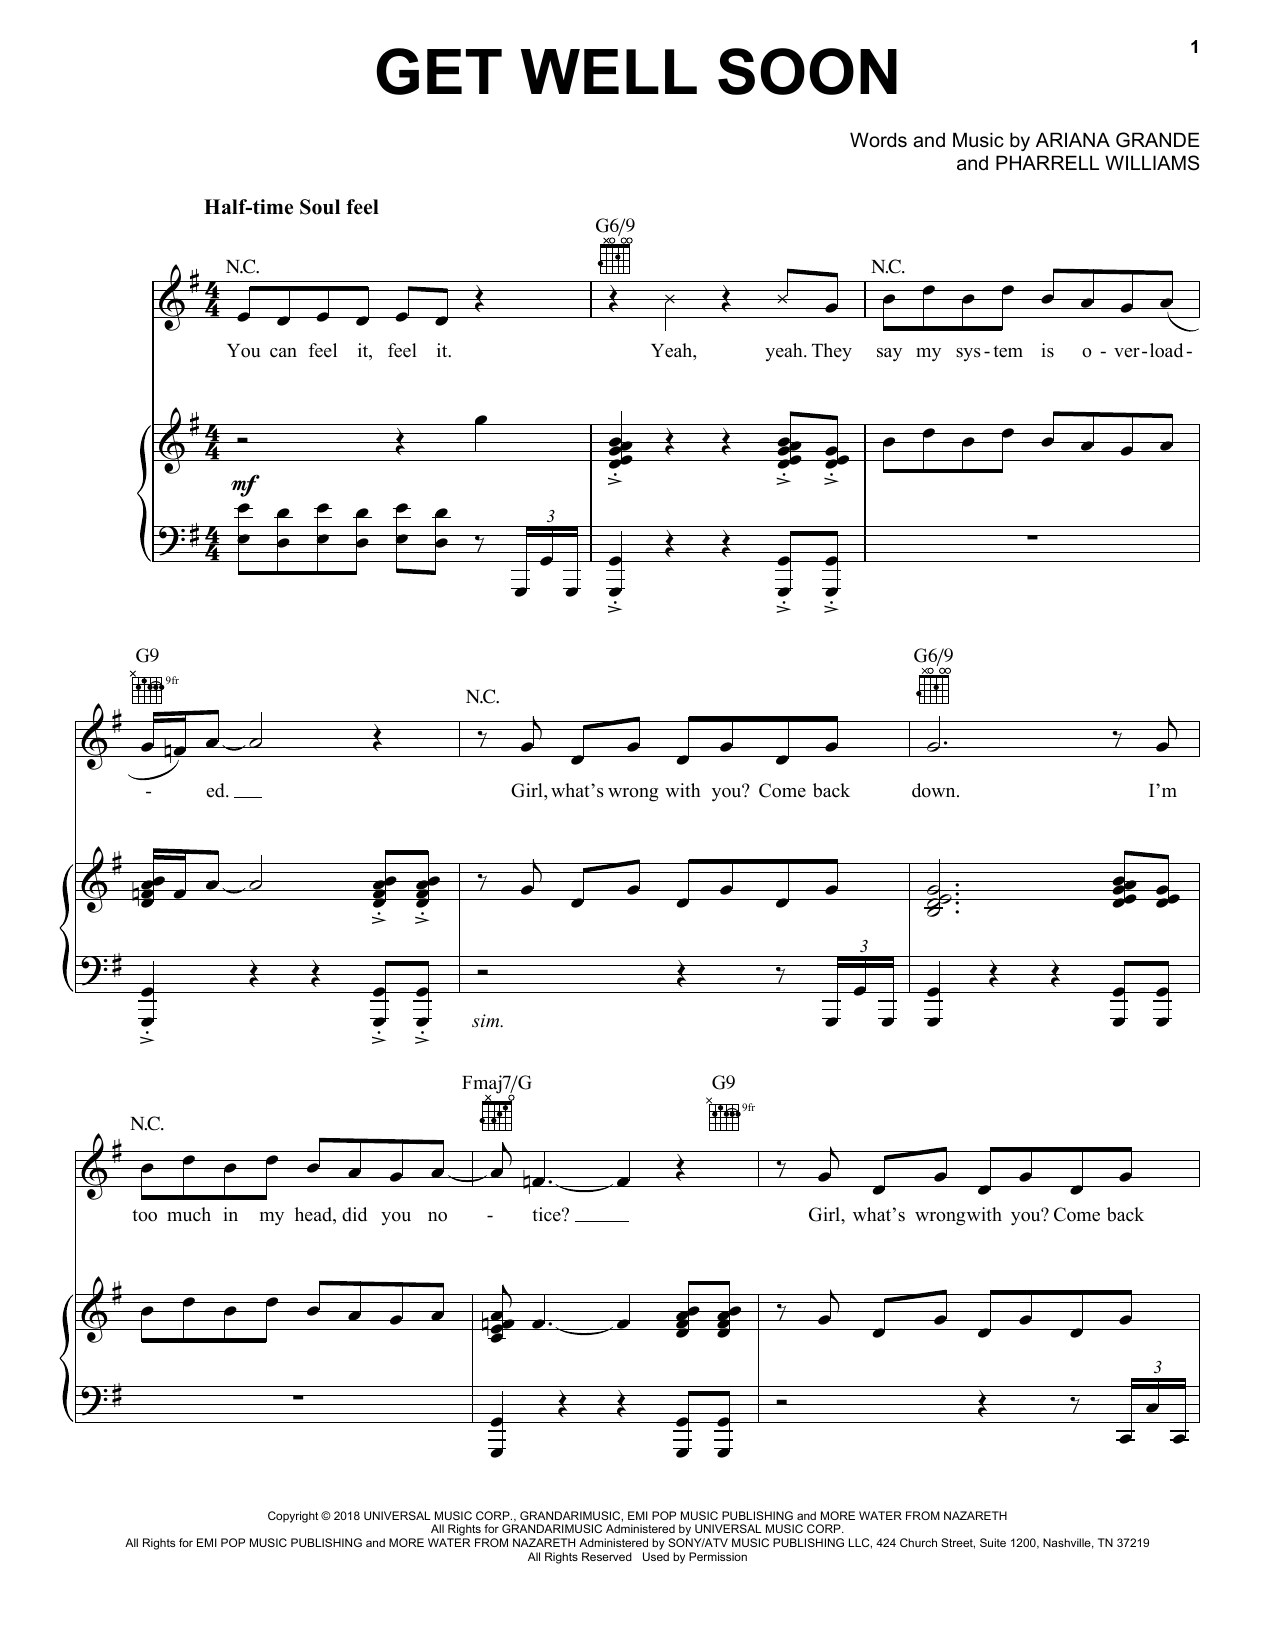 Ariana Grande Get Well Soon sheet music notes and chords. Download Printable PDF.